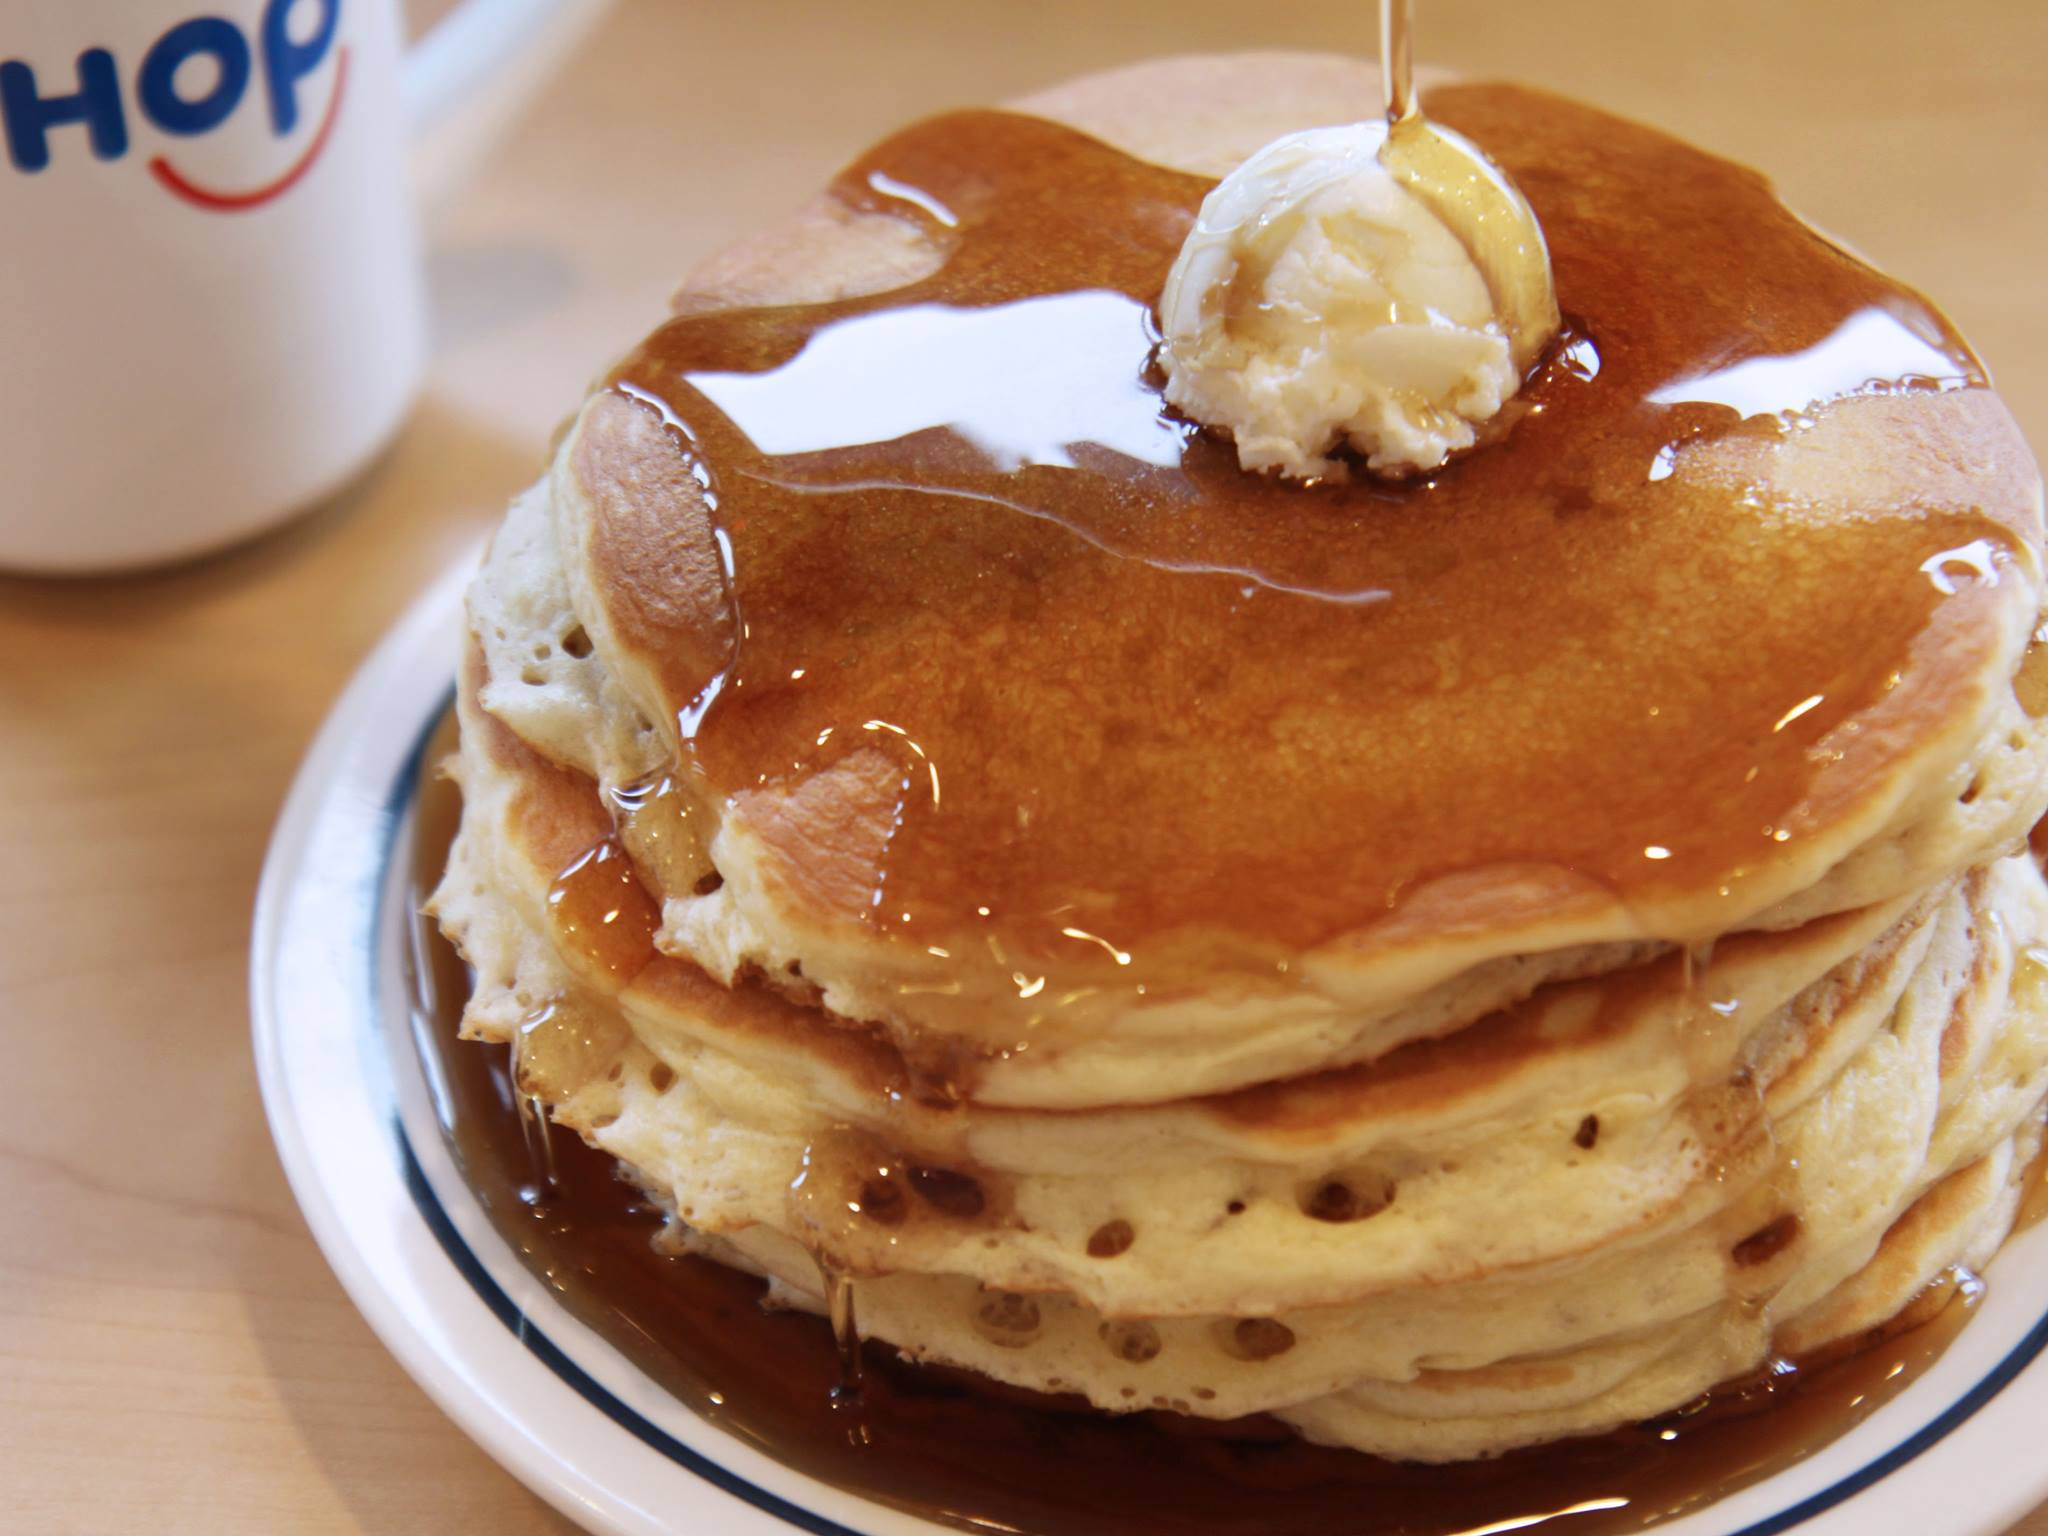 How To Make Ihop Pancakes
 Enjoy Free Pancakes At IHOP March 7 604 Now